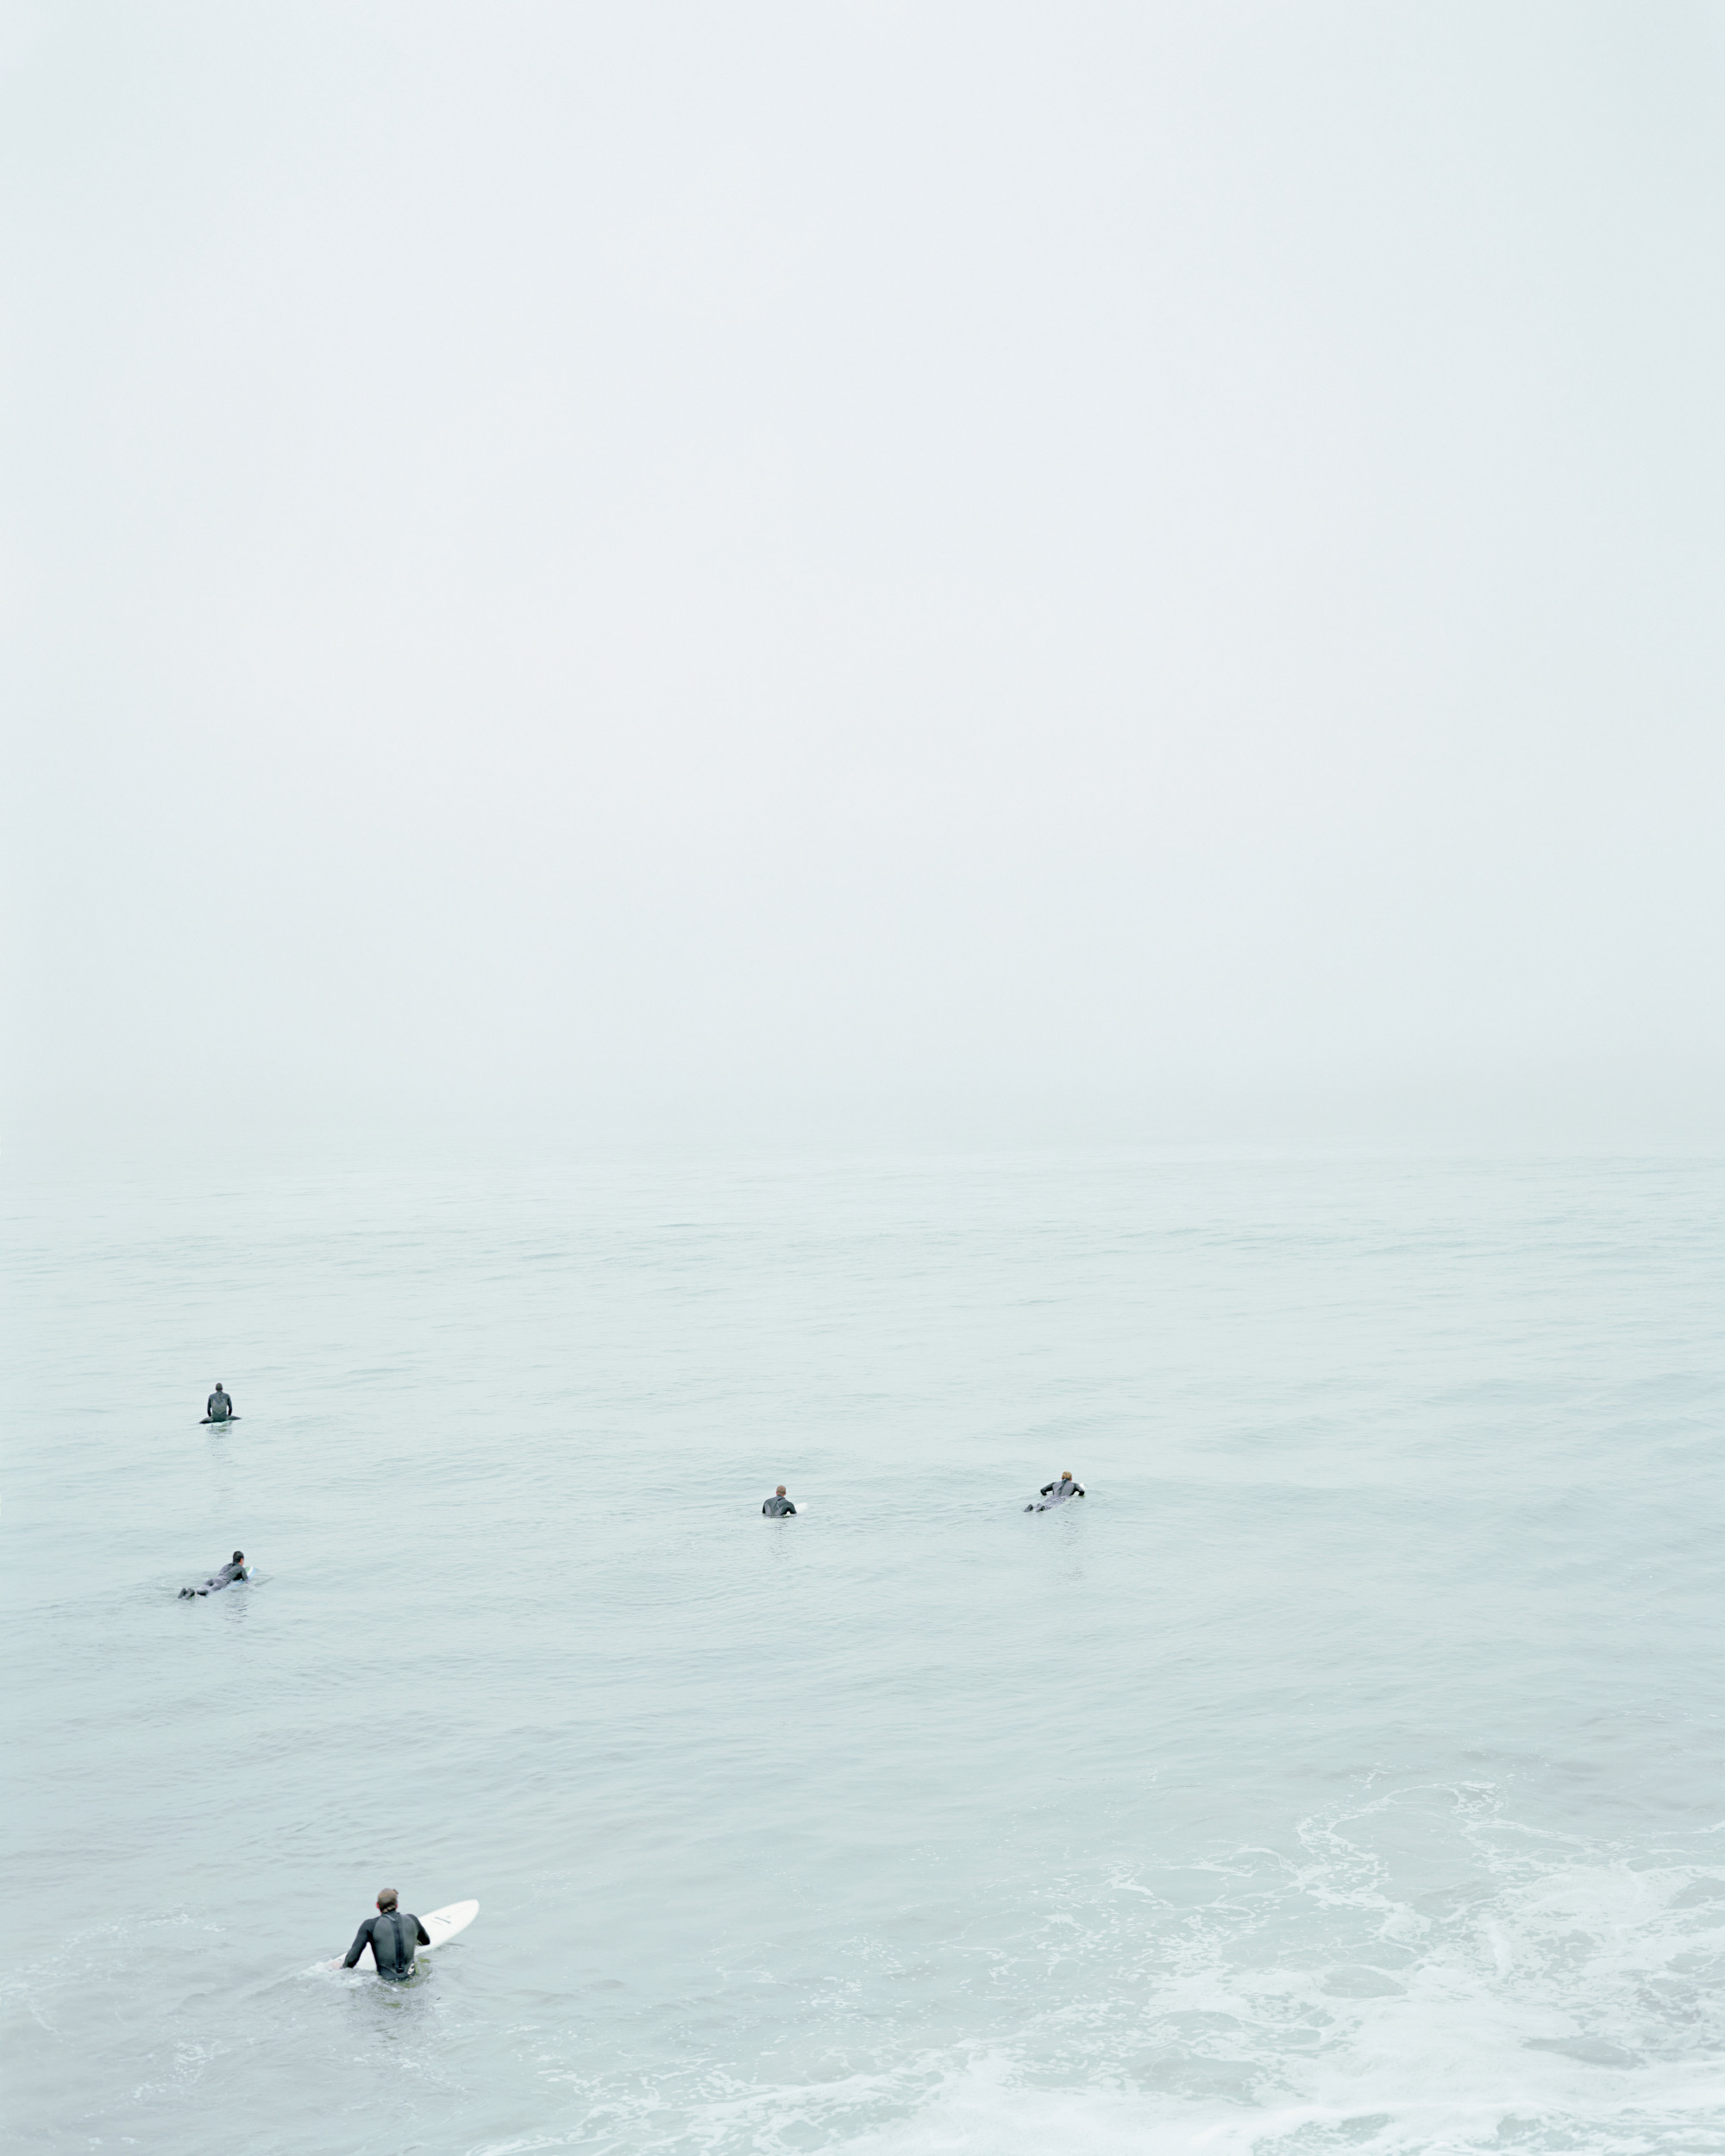  Untitled #4 (Surfers), 2009. Courtesy the artist and Regen Projects, Los Angeles; Lehmann Maupin, New York/Hong Kong/Seoul/London; Thomas Dane Gallery, London and Naples; and Peder Lund, Oslo. Surfers (2003)